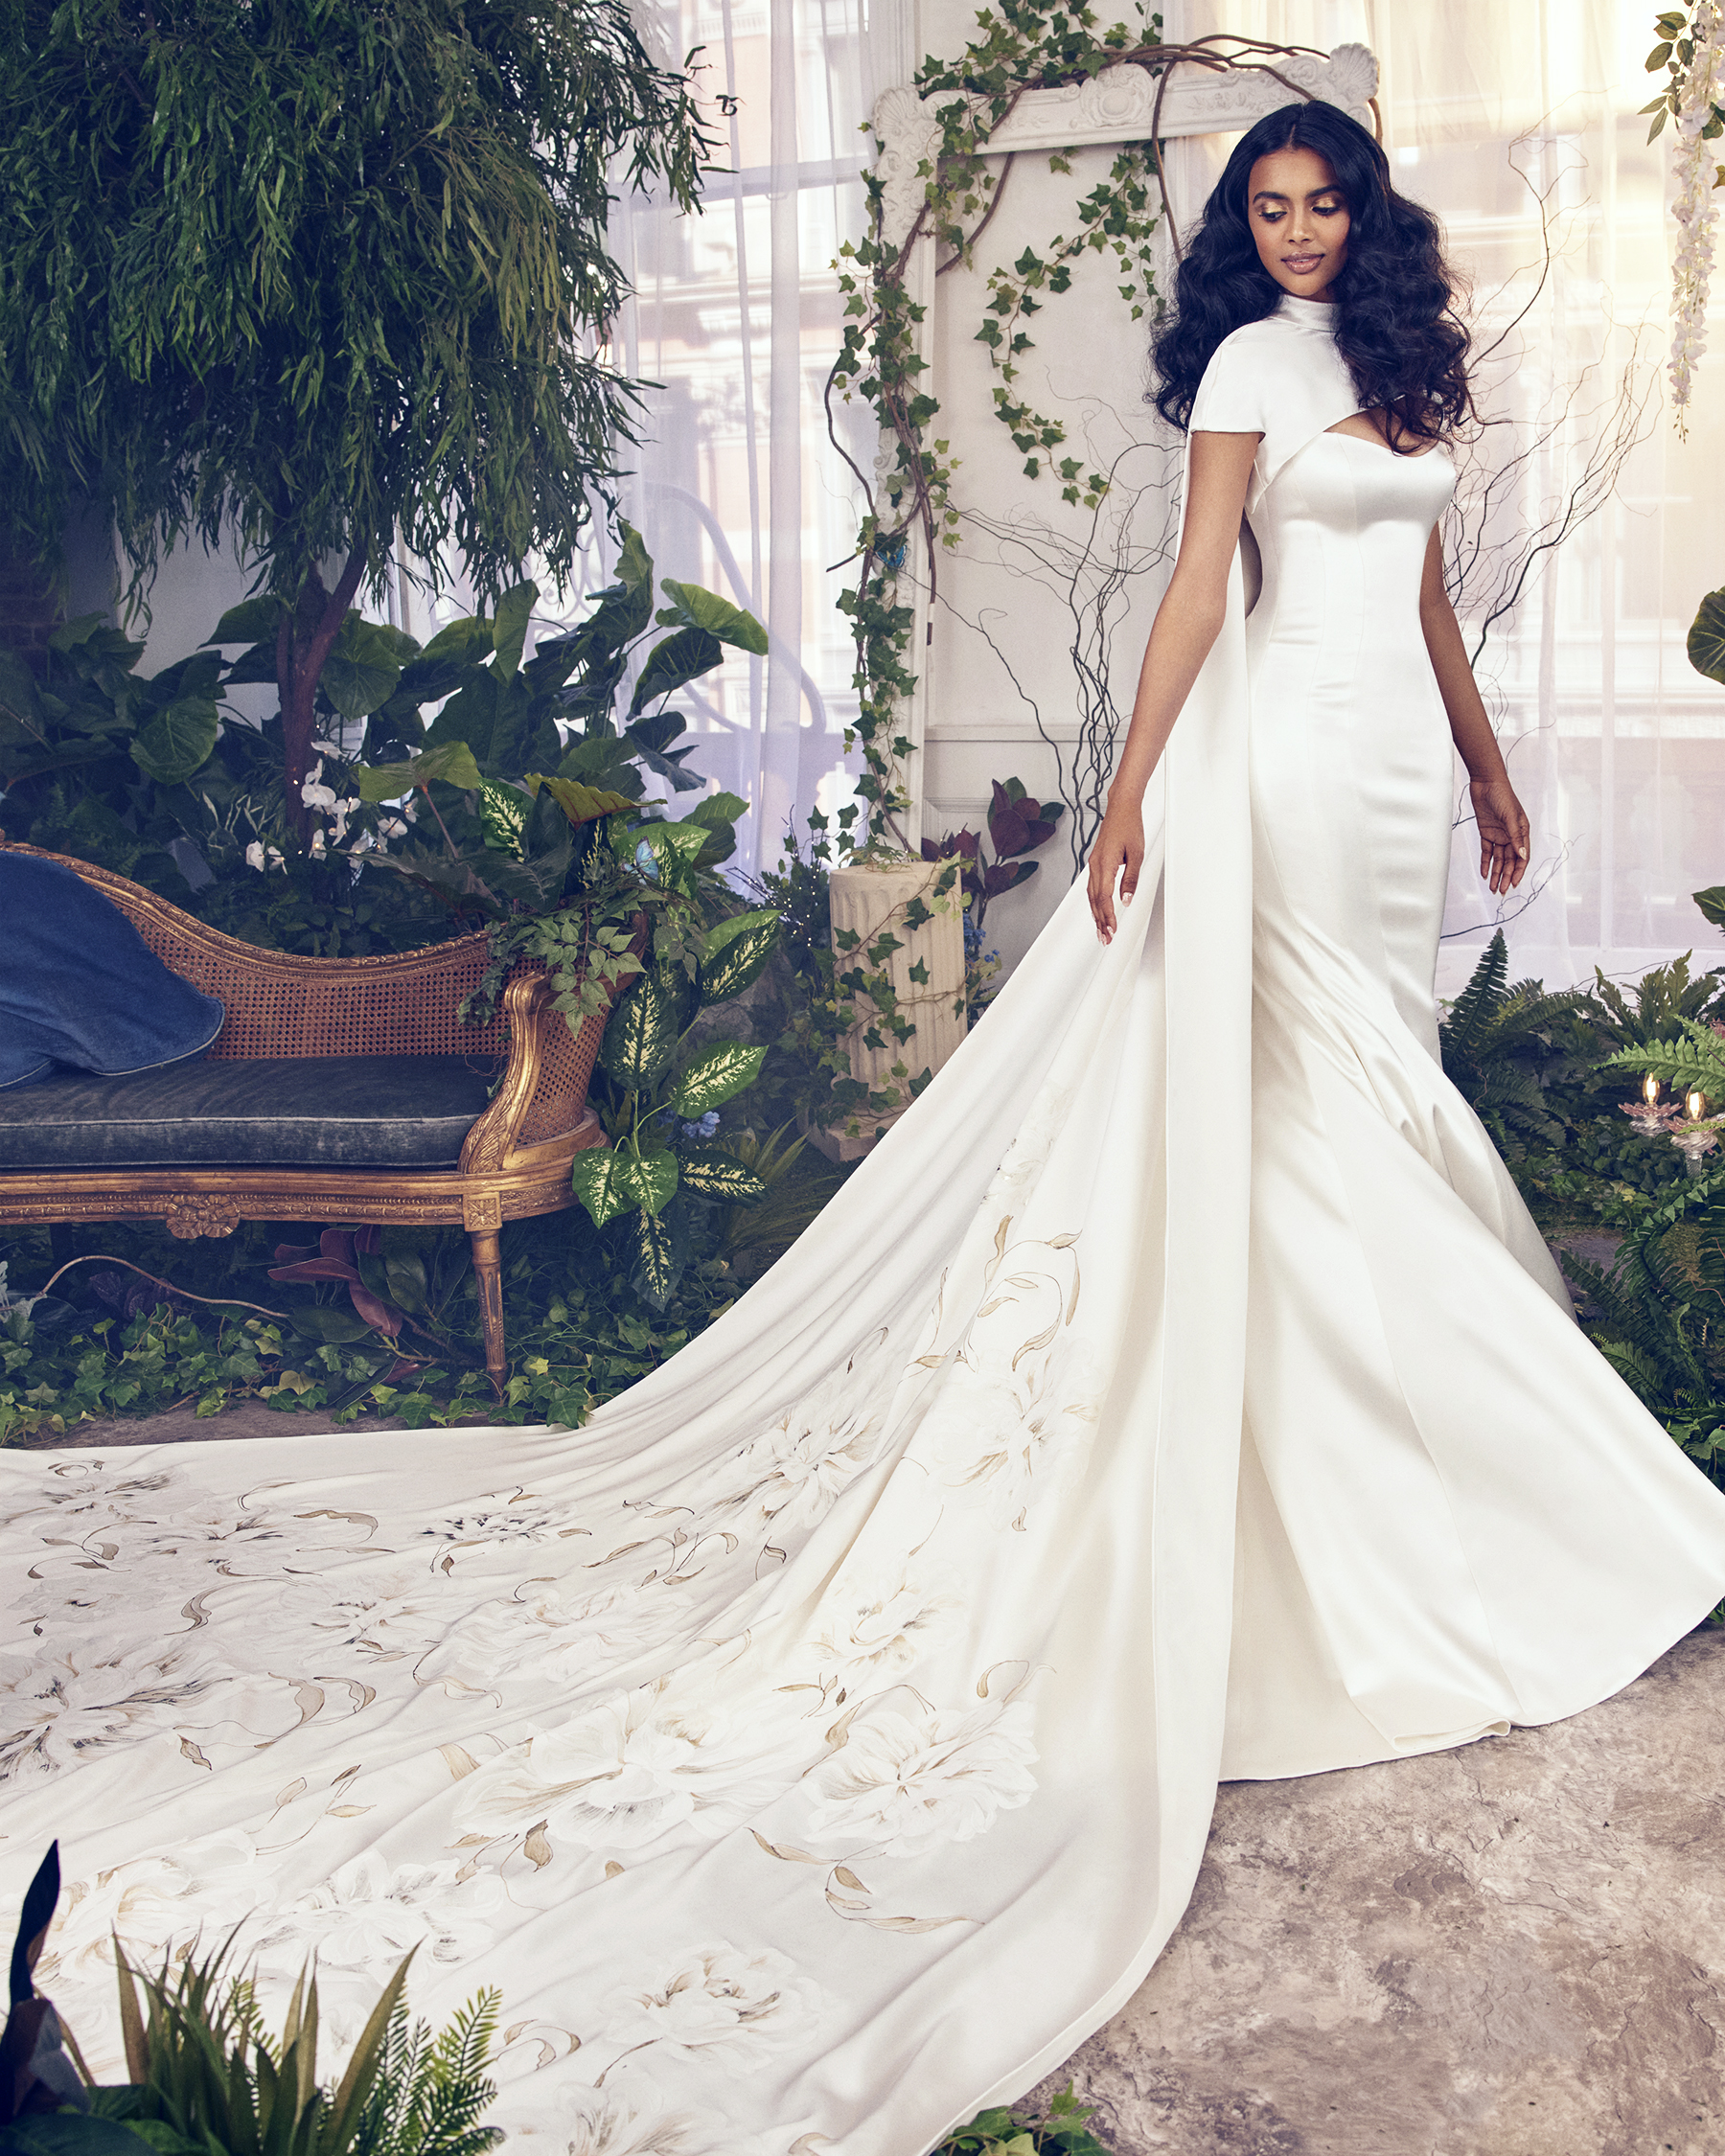 Wedding Dresses for Women with Broad Shoulders - Wedding Style